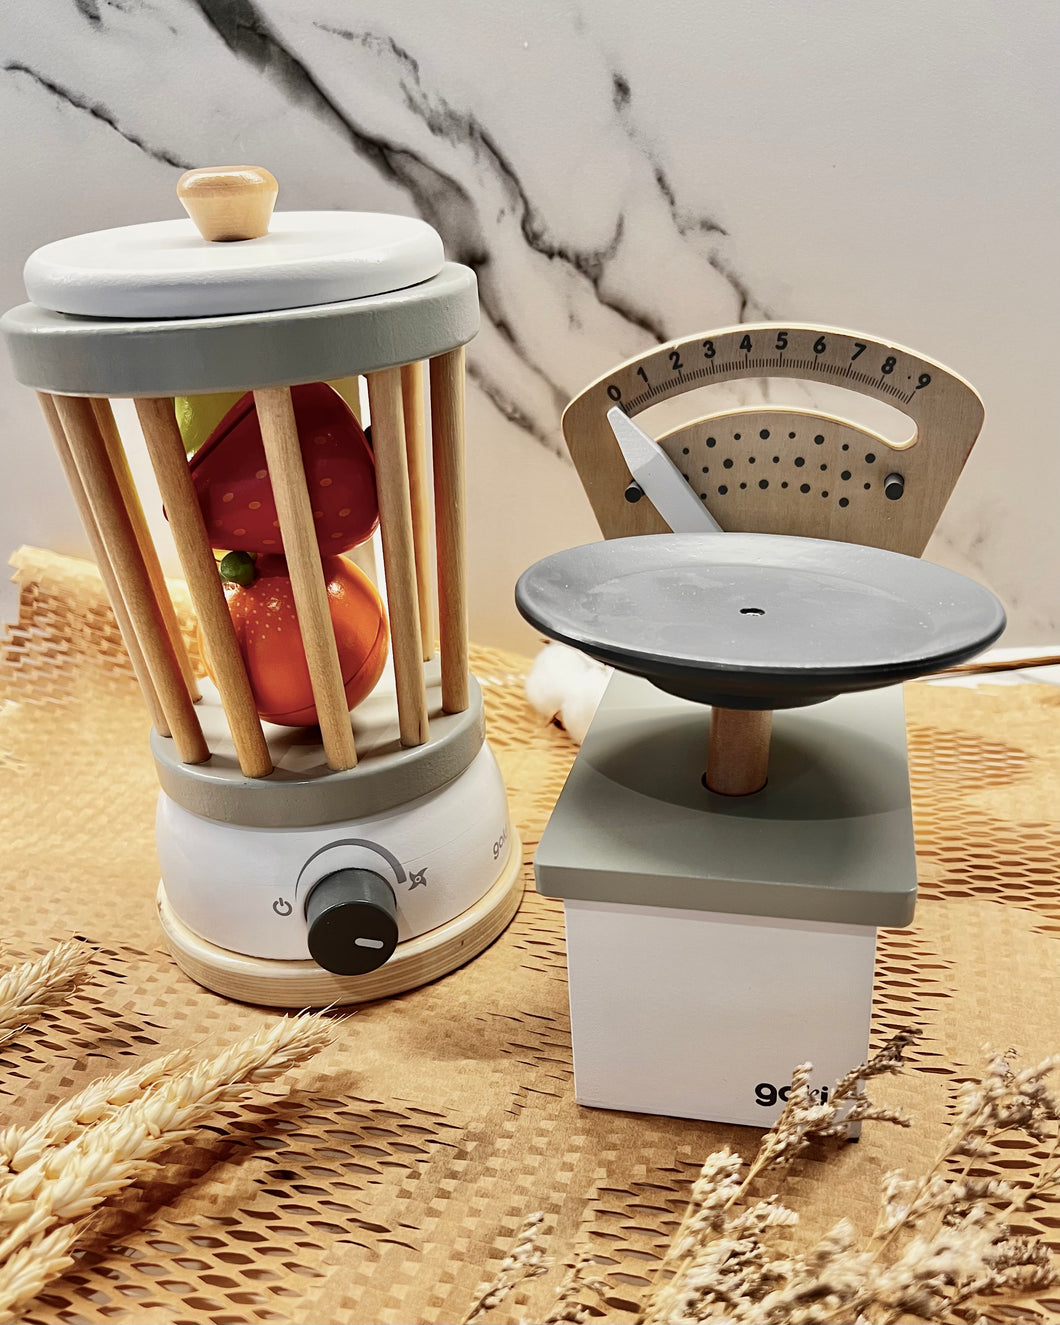 Wooden Blender with Fruits